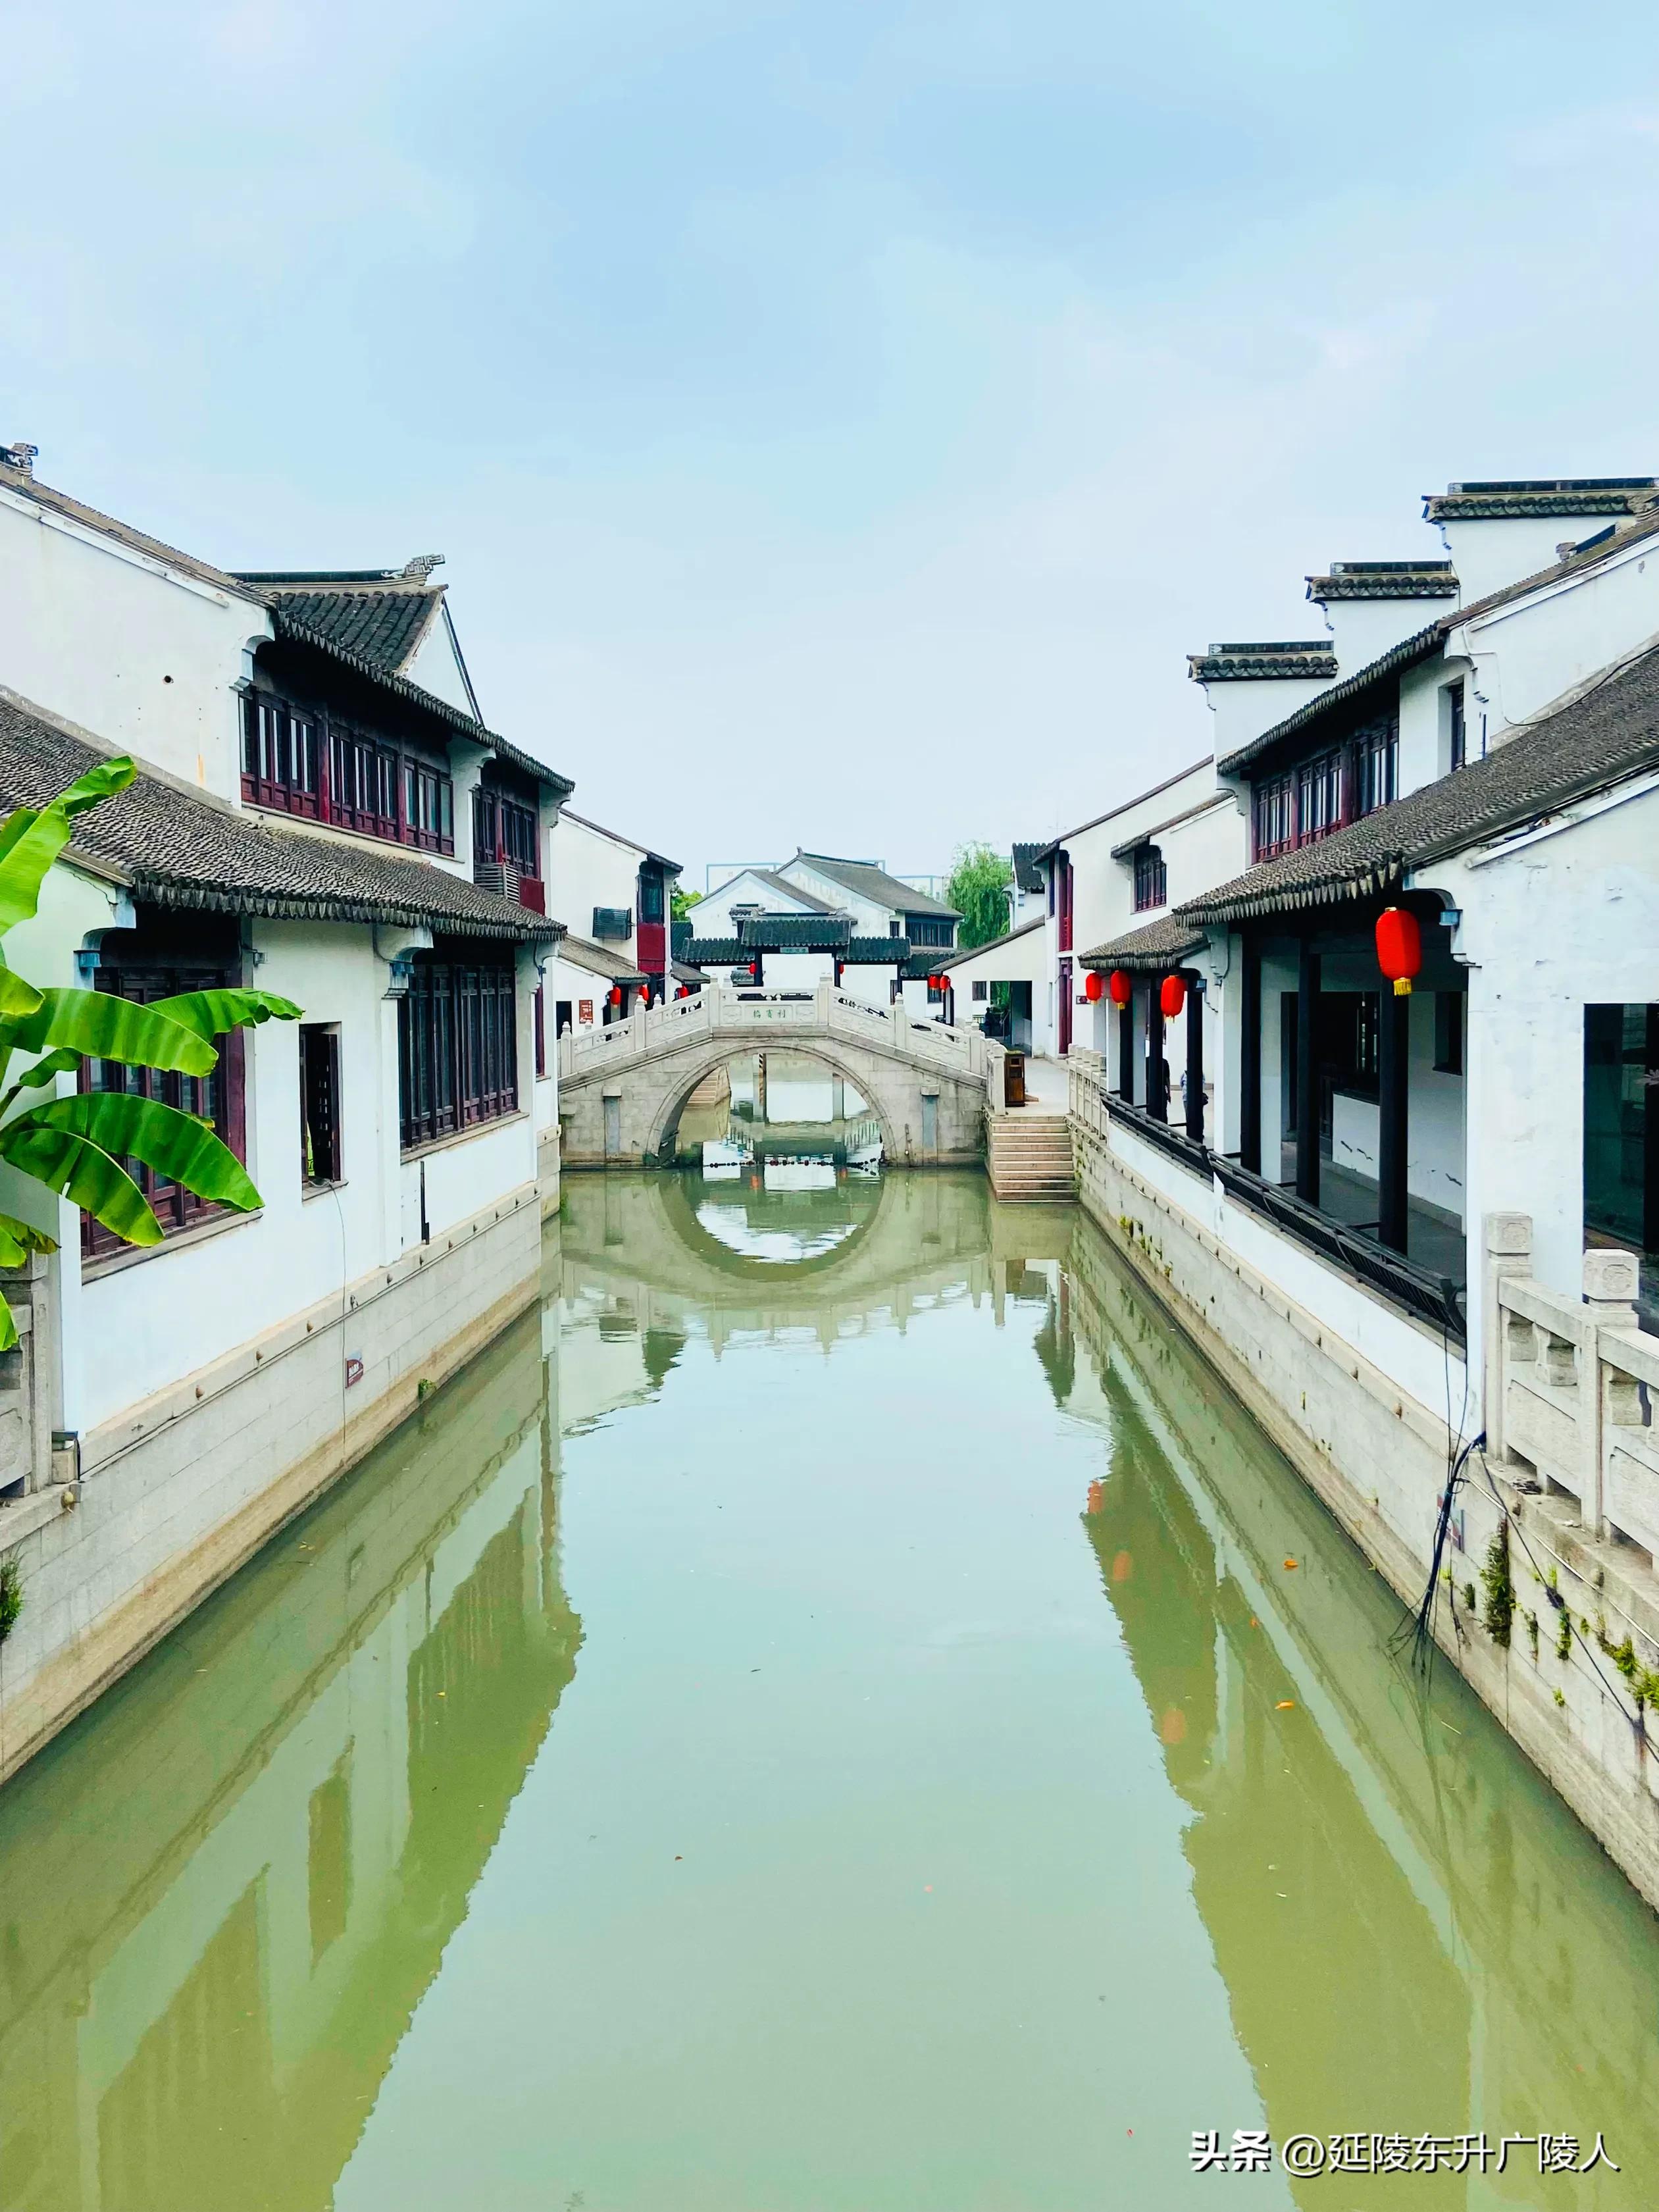 The Wansheng rice line Arhat in the ancient town of Luzhi, a water town ...